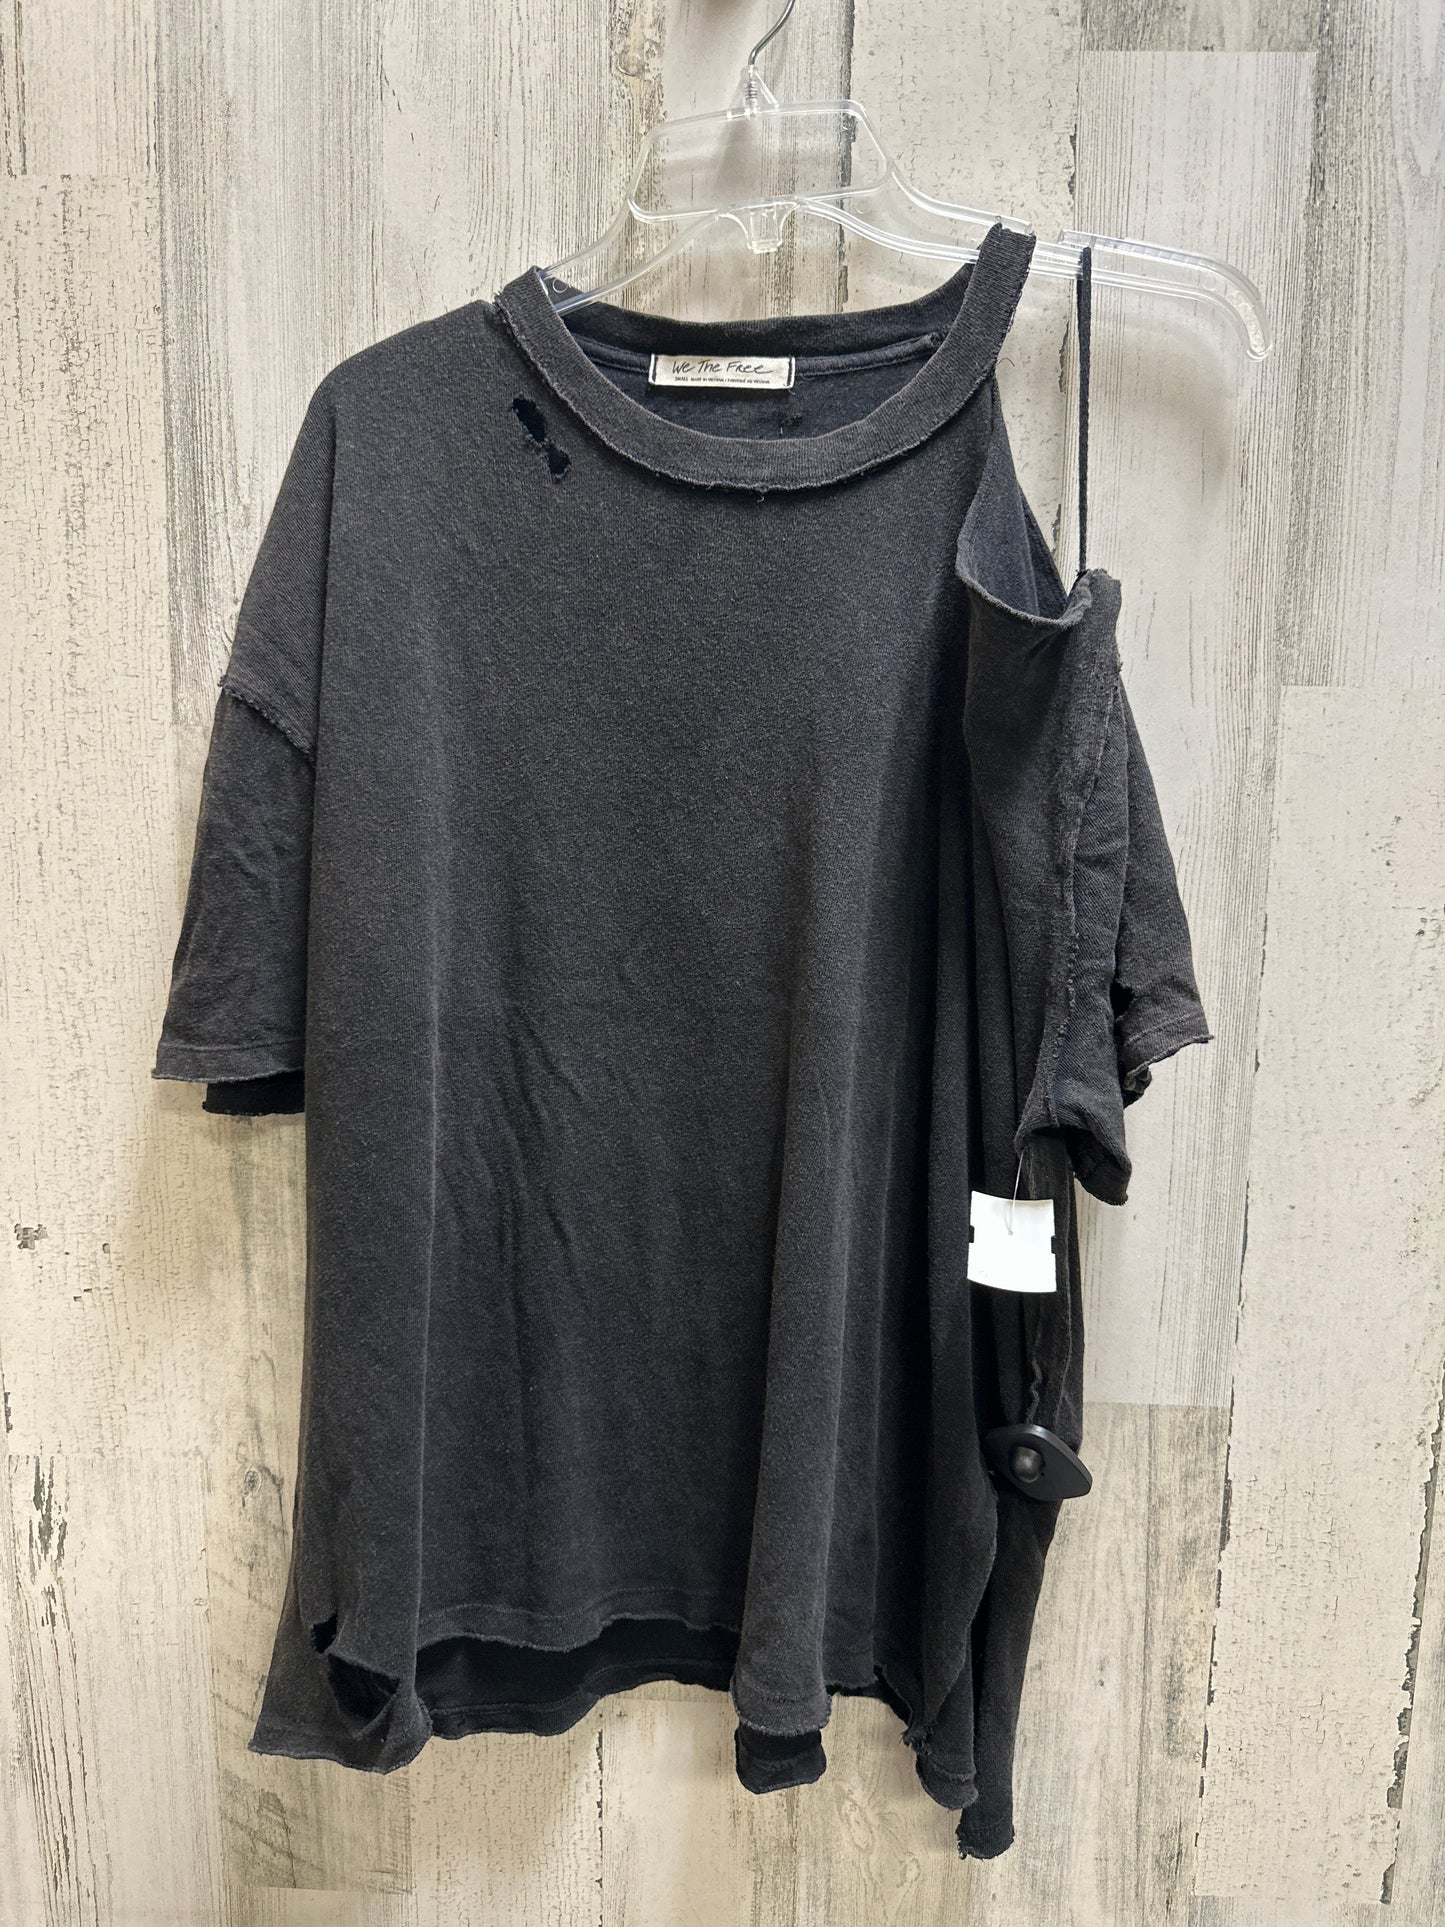 Black Top Short Sleeve Free People, Size S